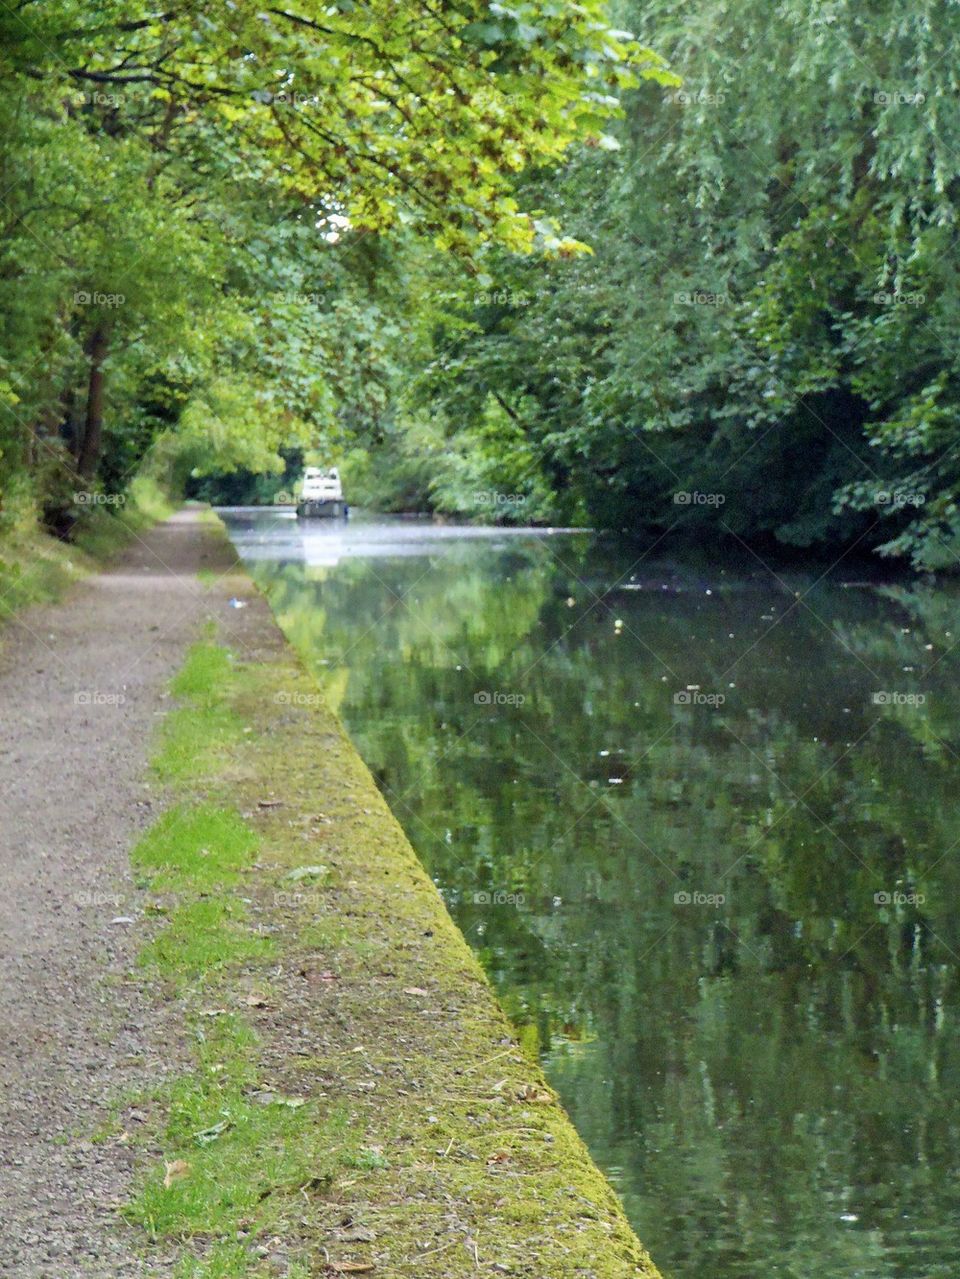 Boat in the Brum canal